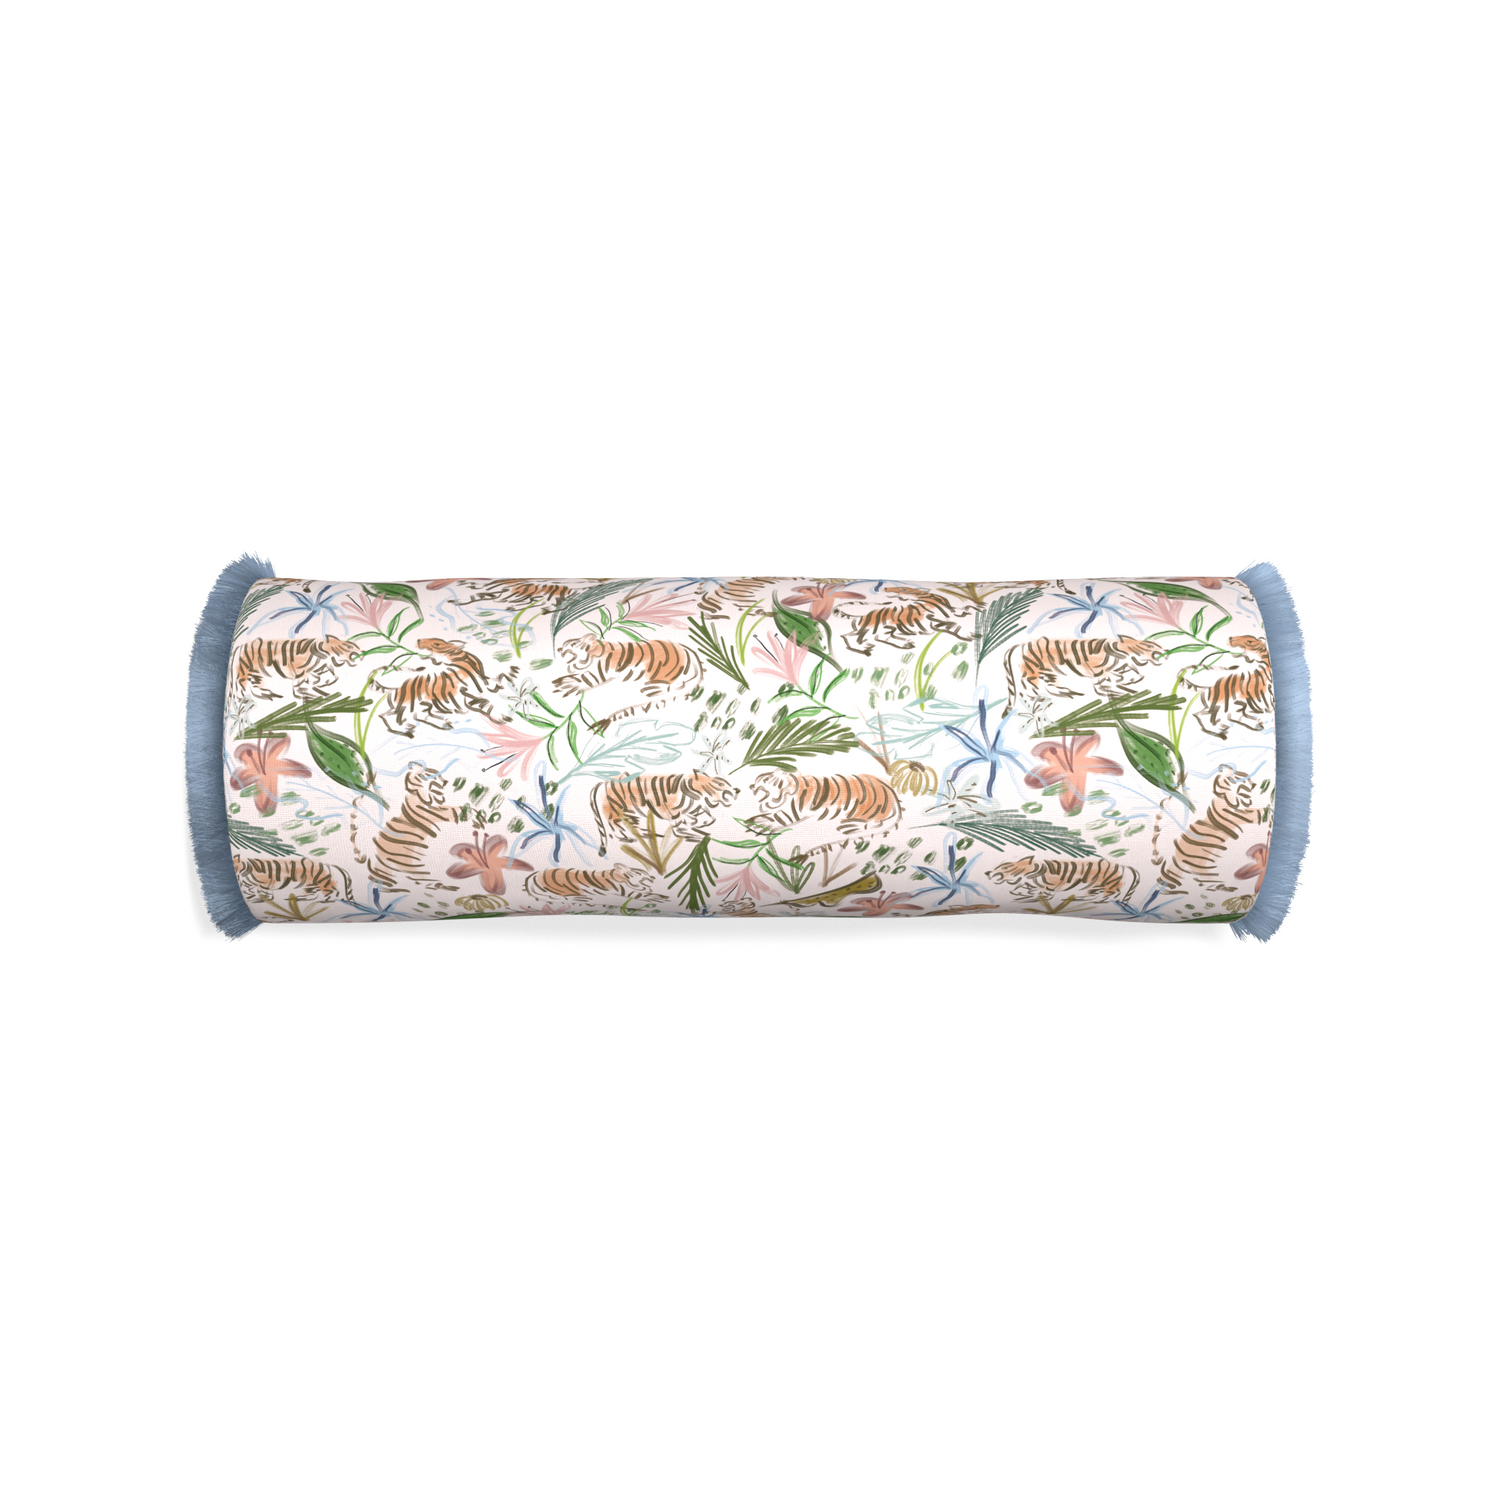 Bolster frida pink custom pink chinoiserie tigerpillow with sky fringe on white background